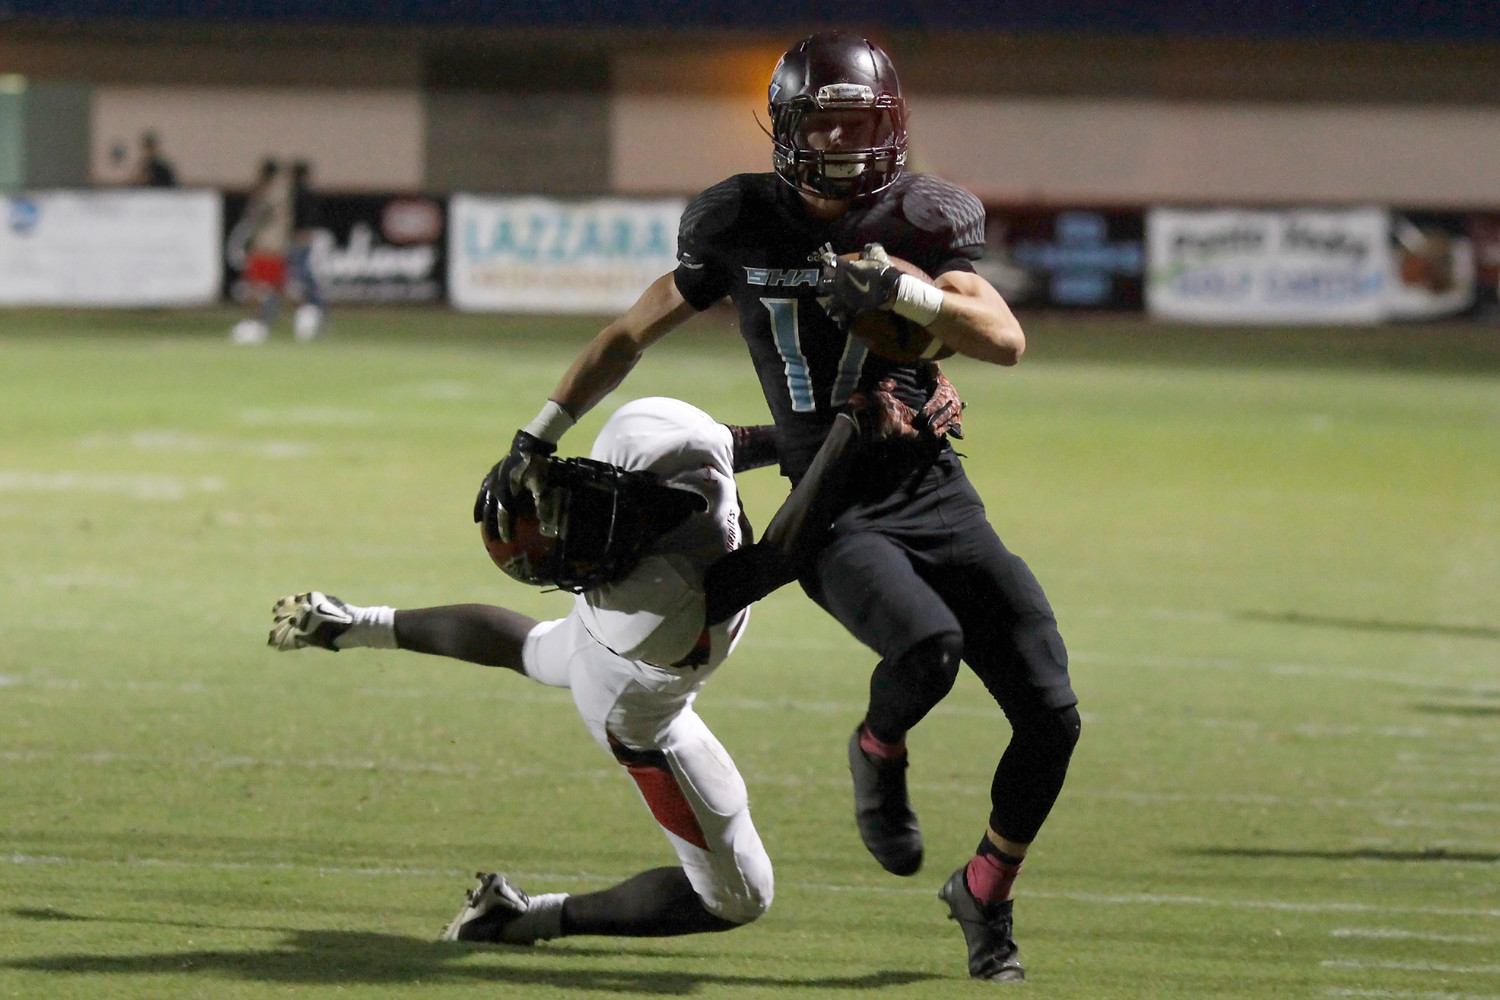 Tommy Zitiello of Ponte Vedra grabs a touchdown pass from Jack Murrah.